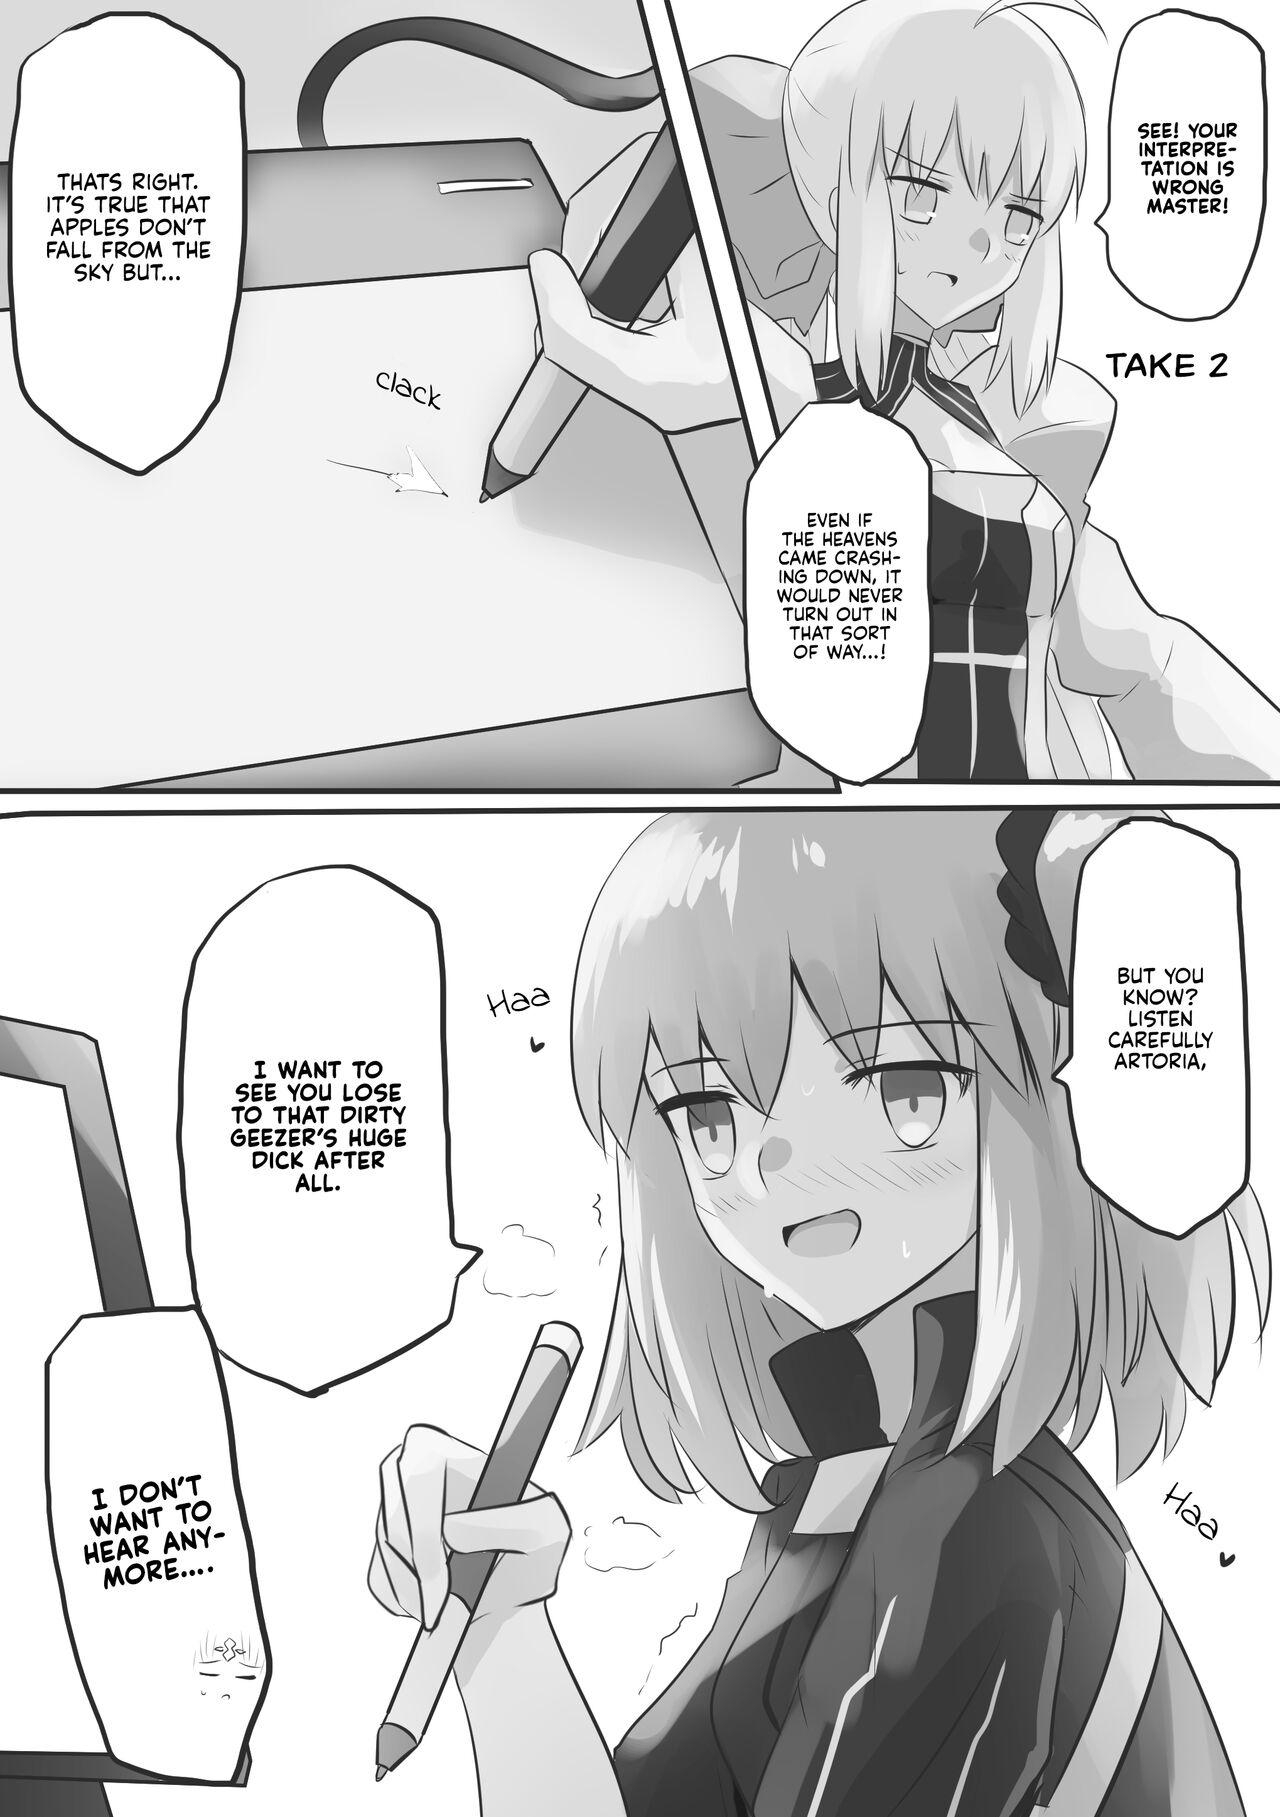 Pussy Fucking Mura x Caster 1 - Fate grand order Argentina - Page 8